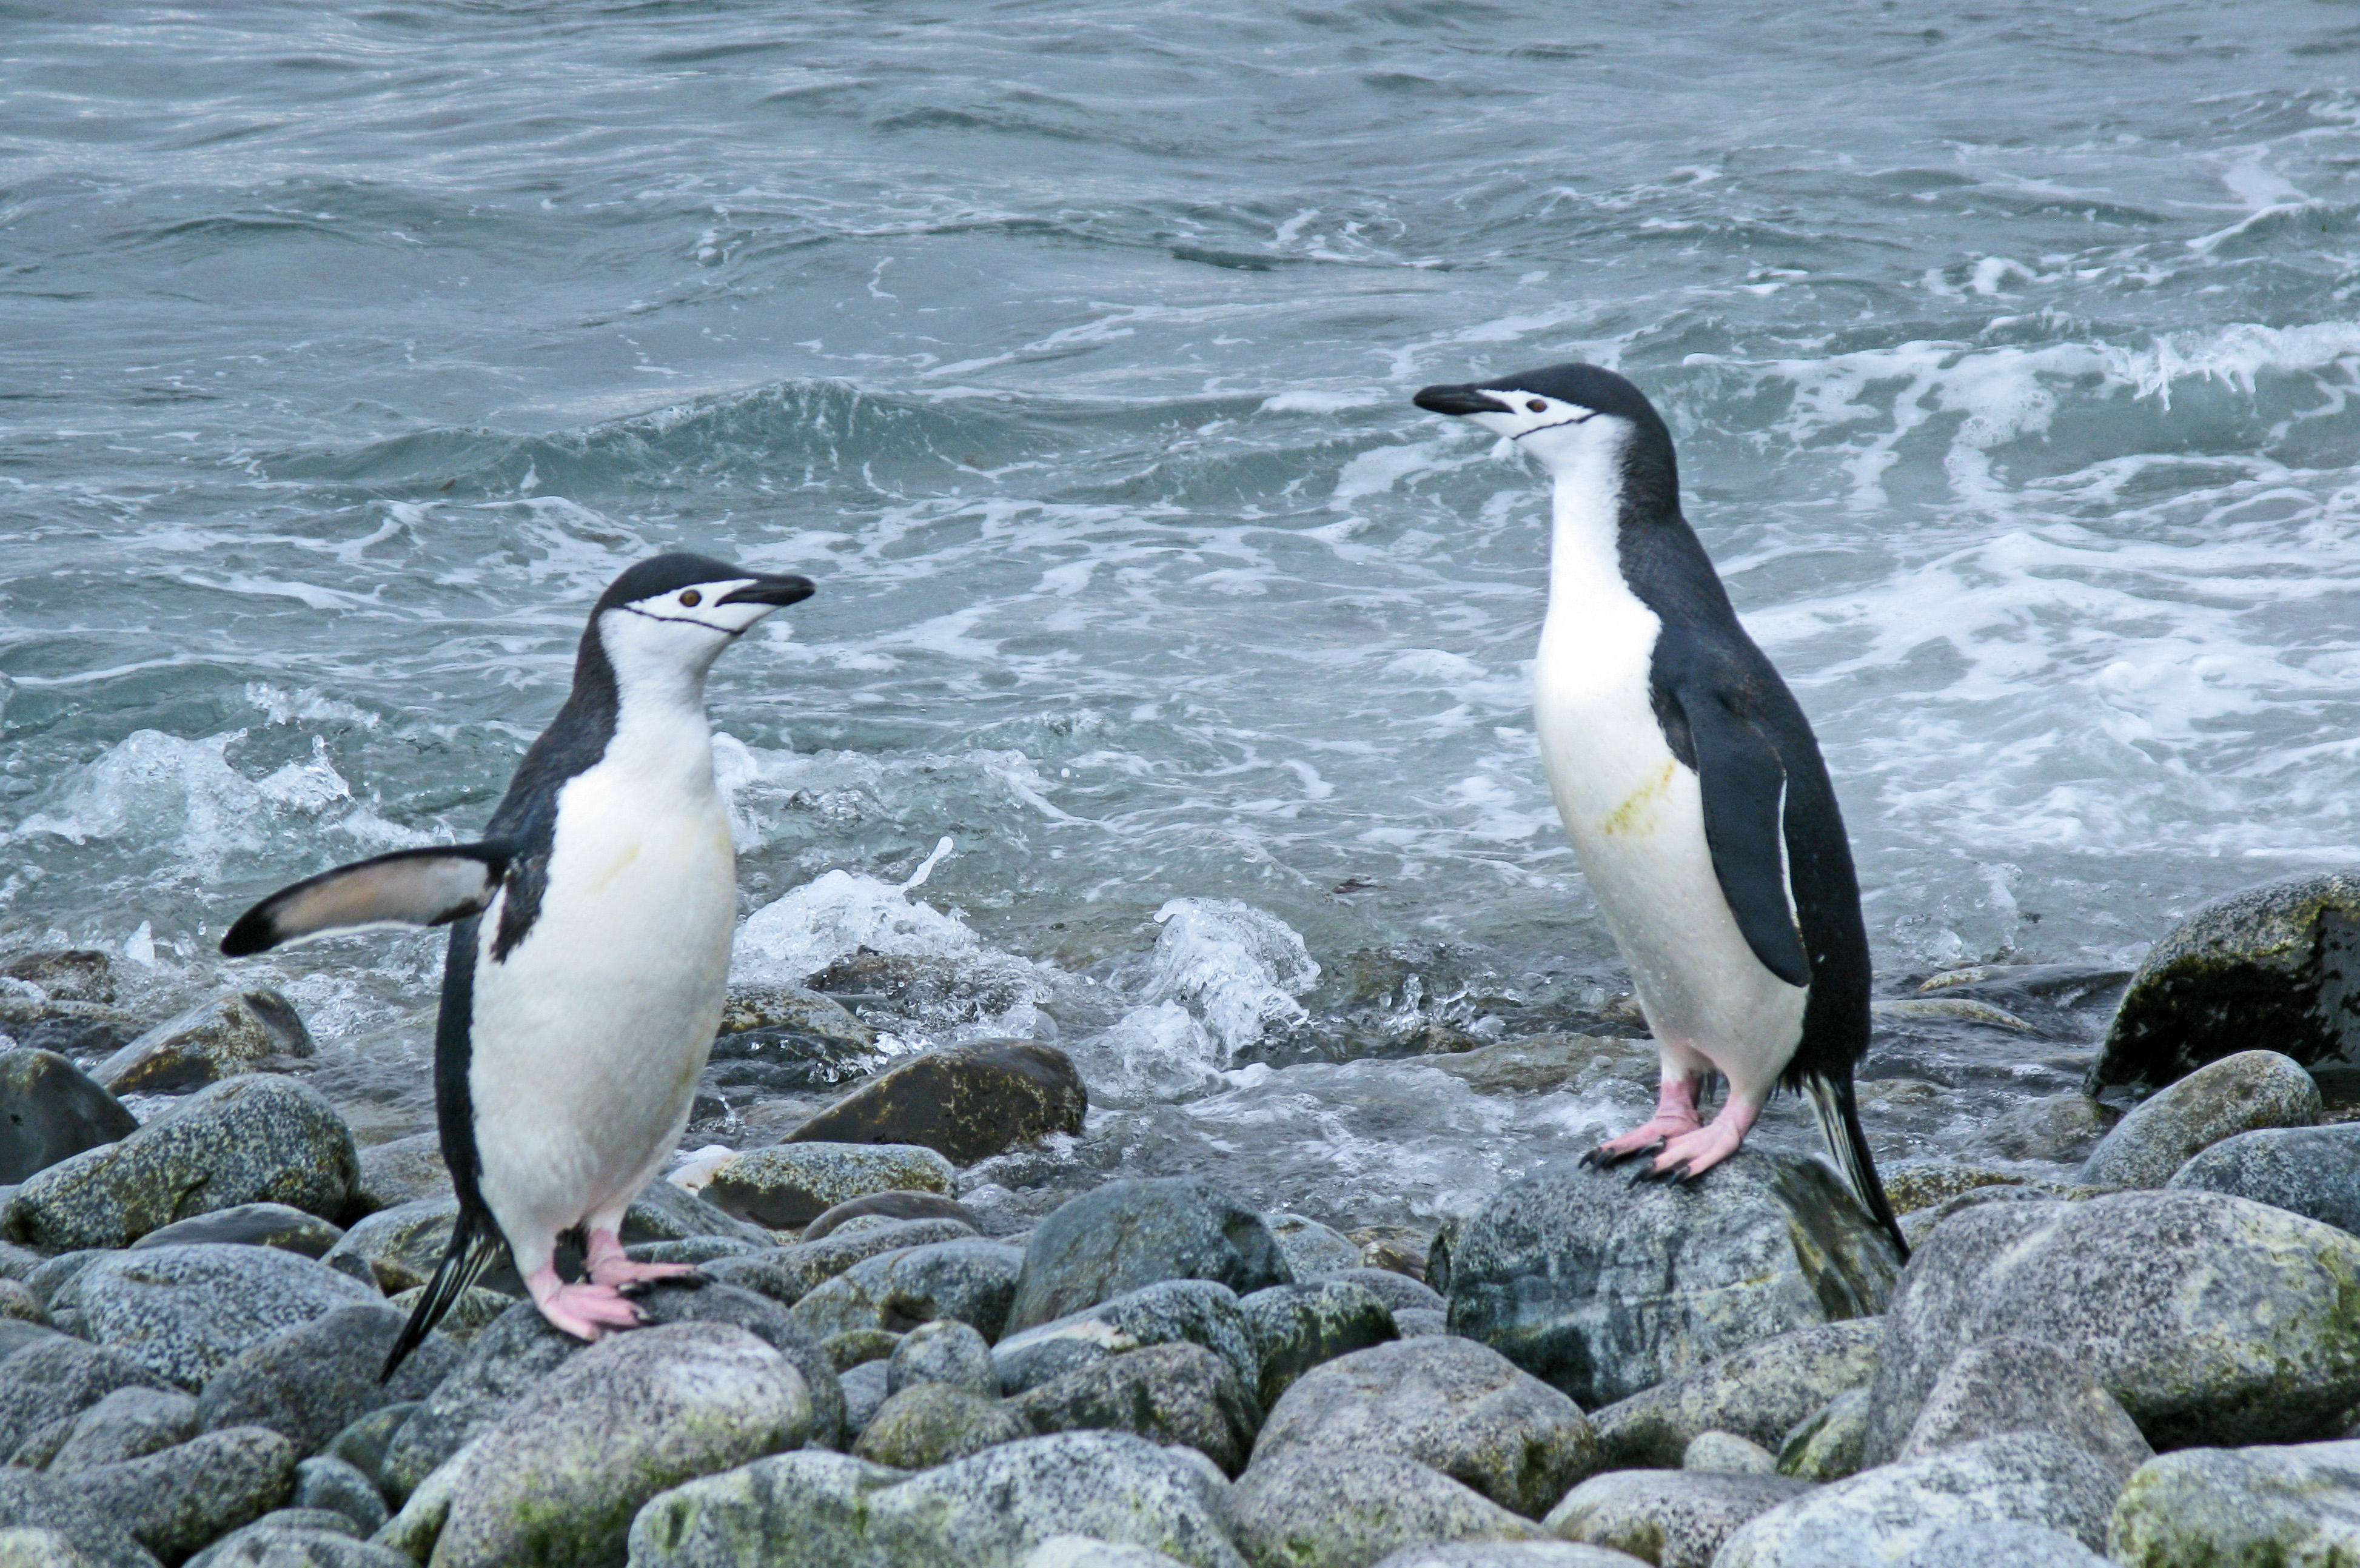 Two penguins.